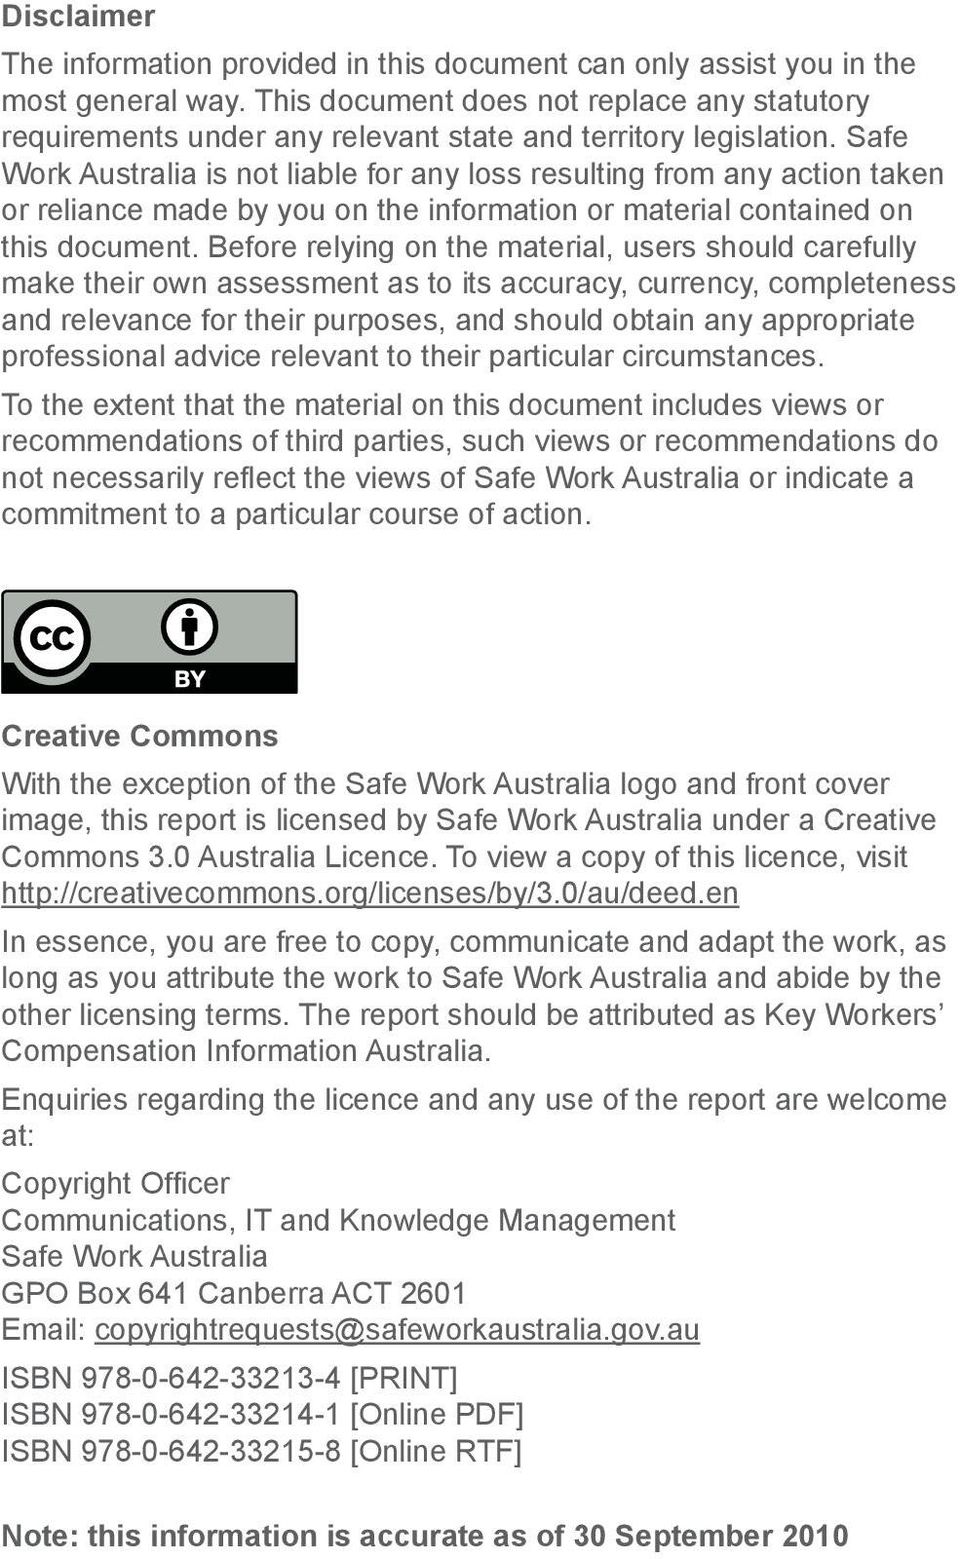 Safe Work Australia is not liable for any loss resulting from any action taken or reliance made by you on the information or material contained on this document.